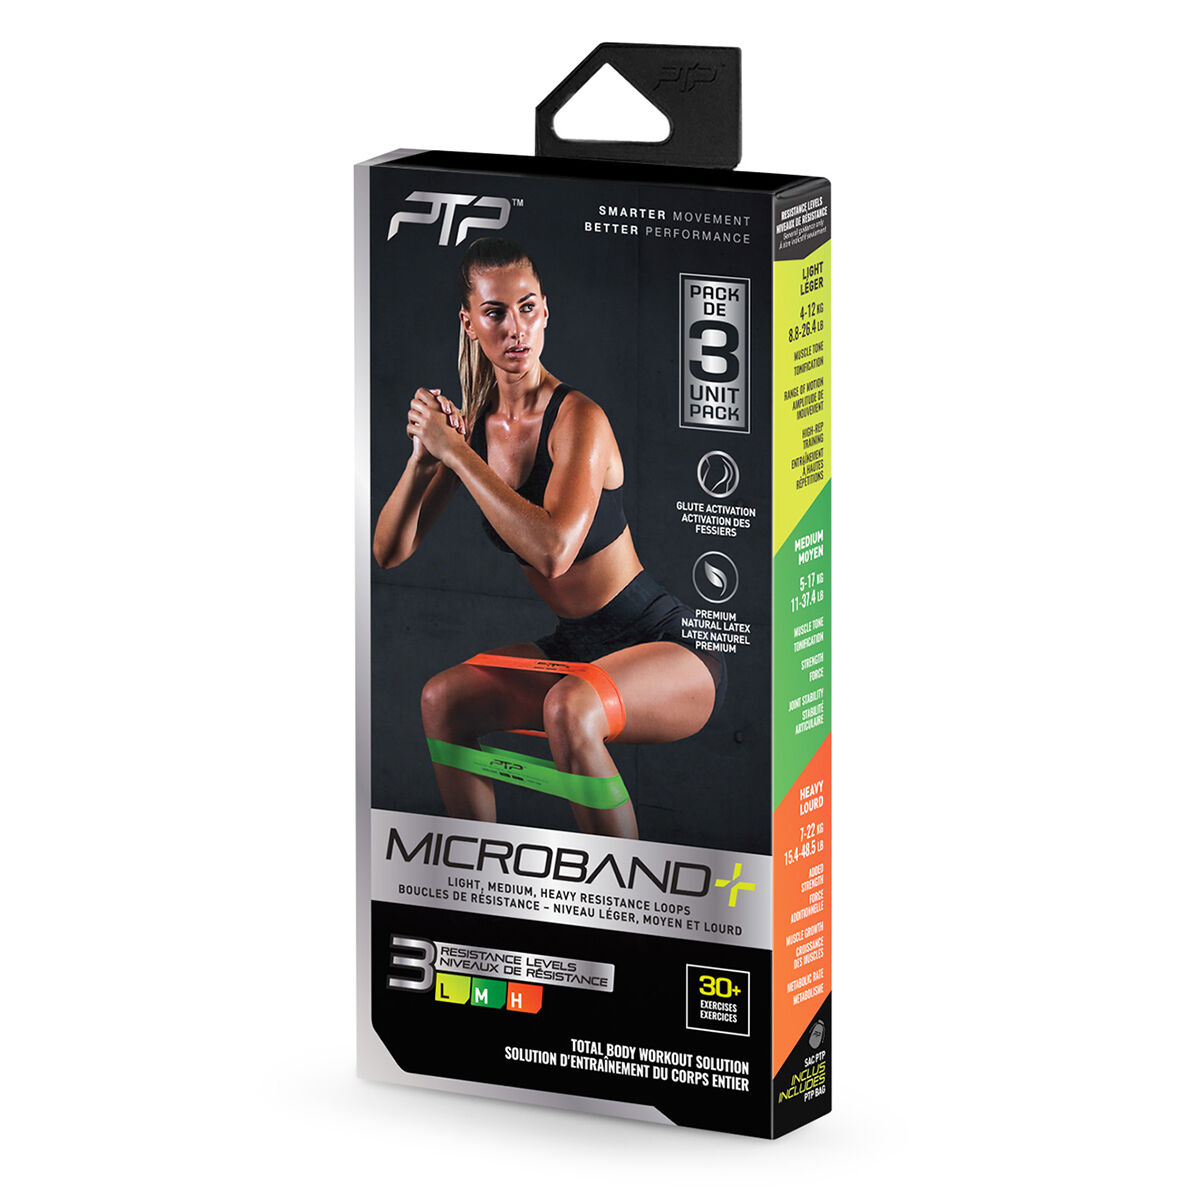 PTP MicroBand+ 3 Pack Resistance Bands